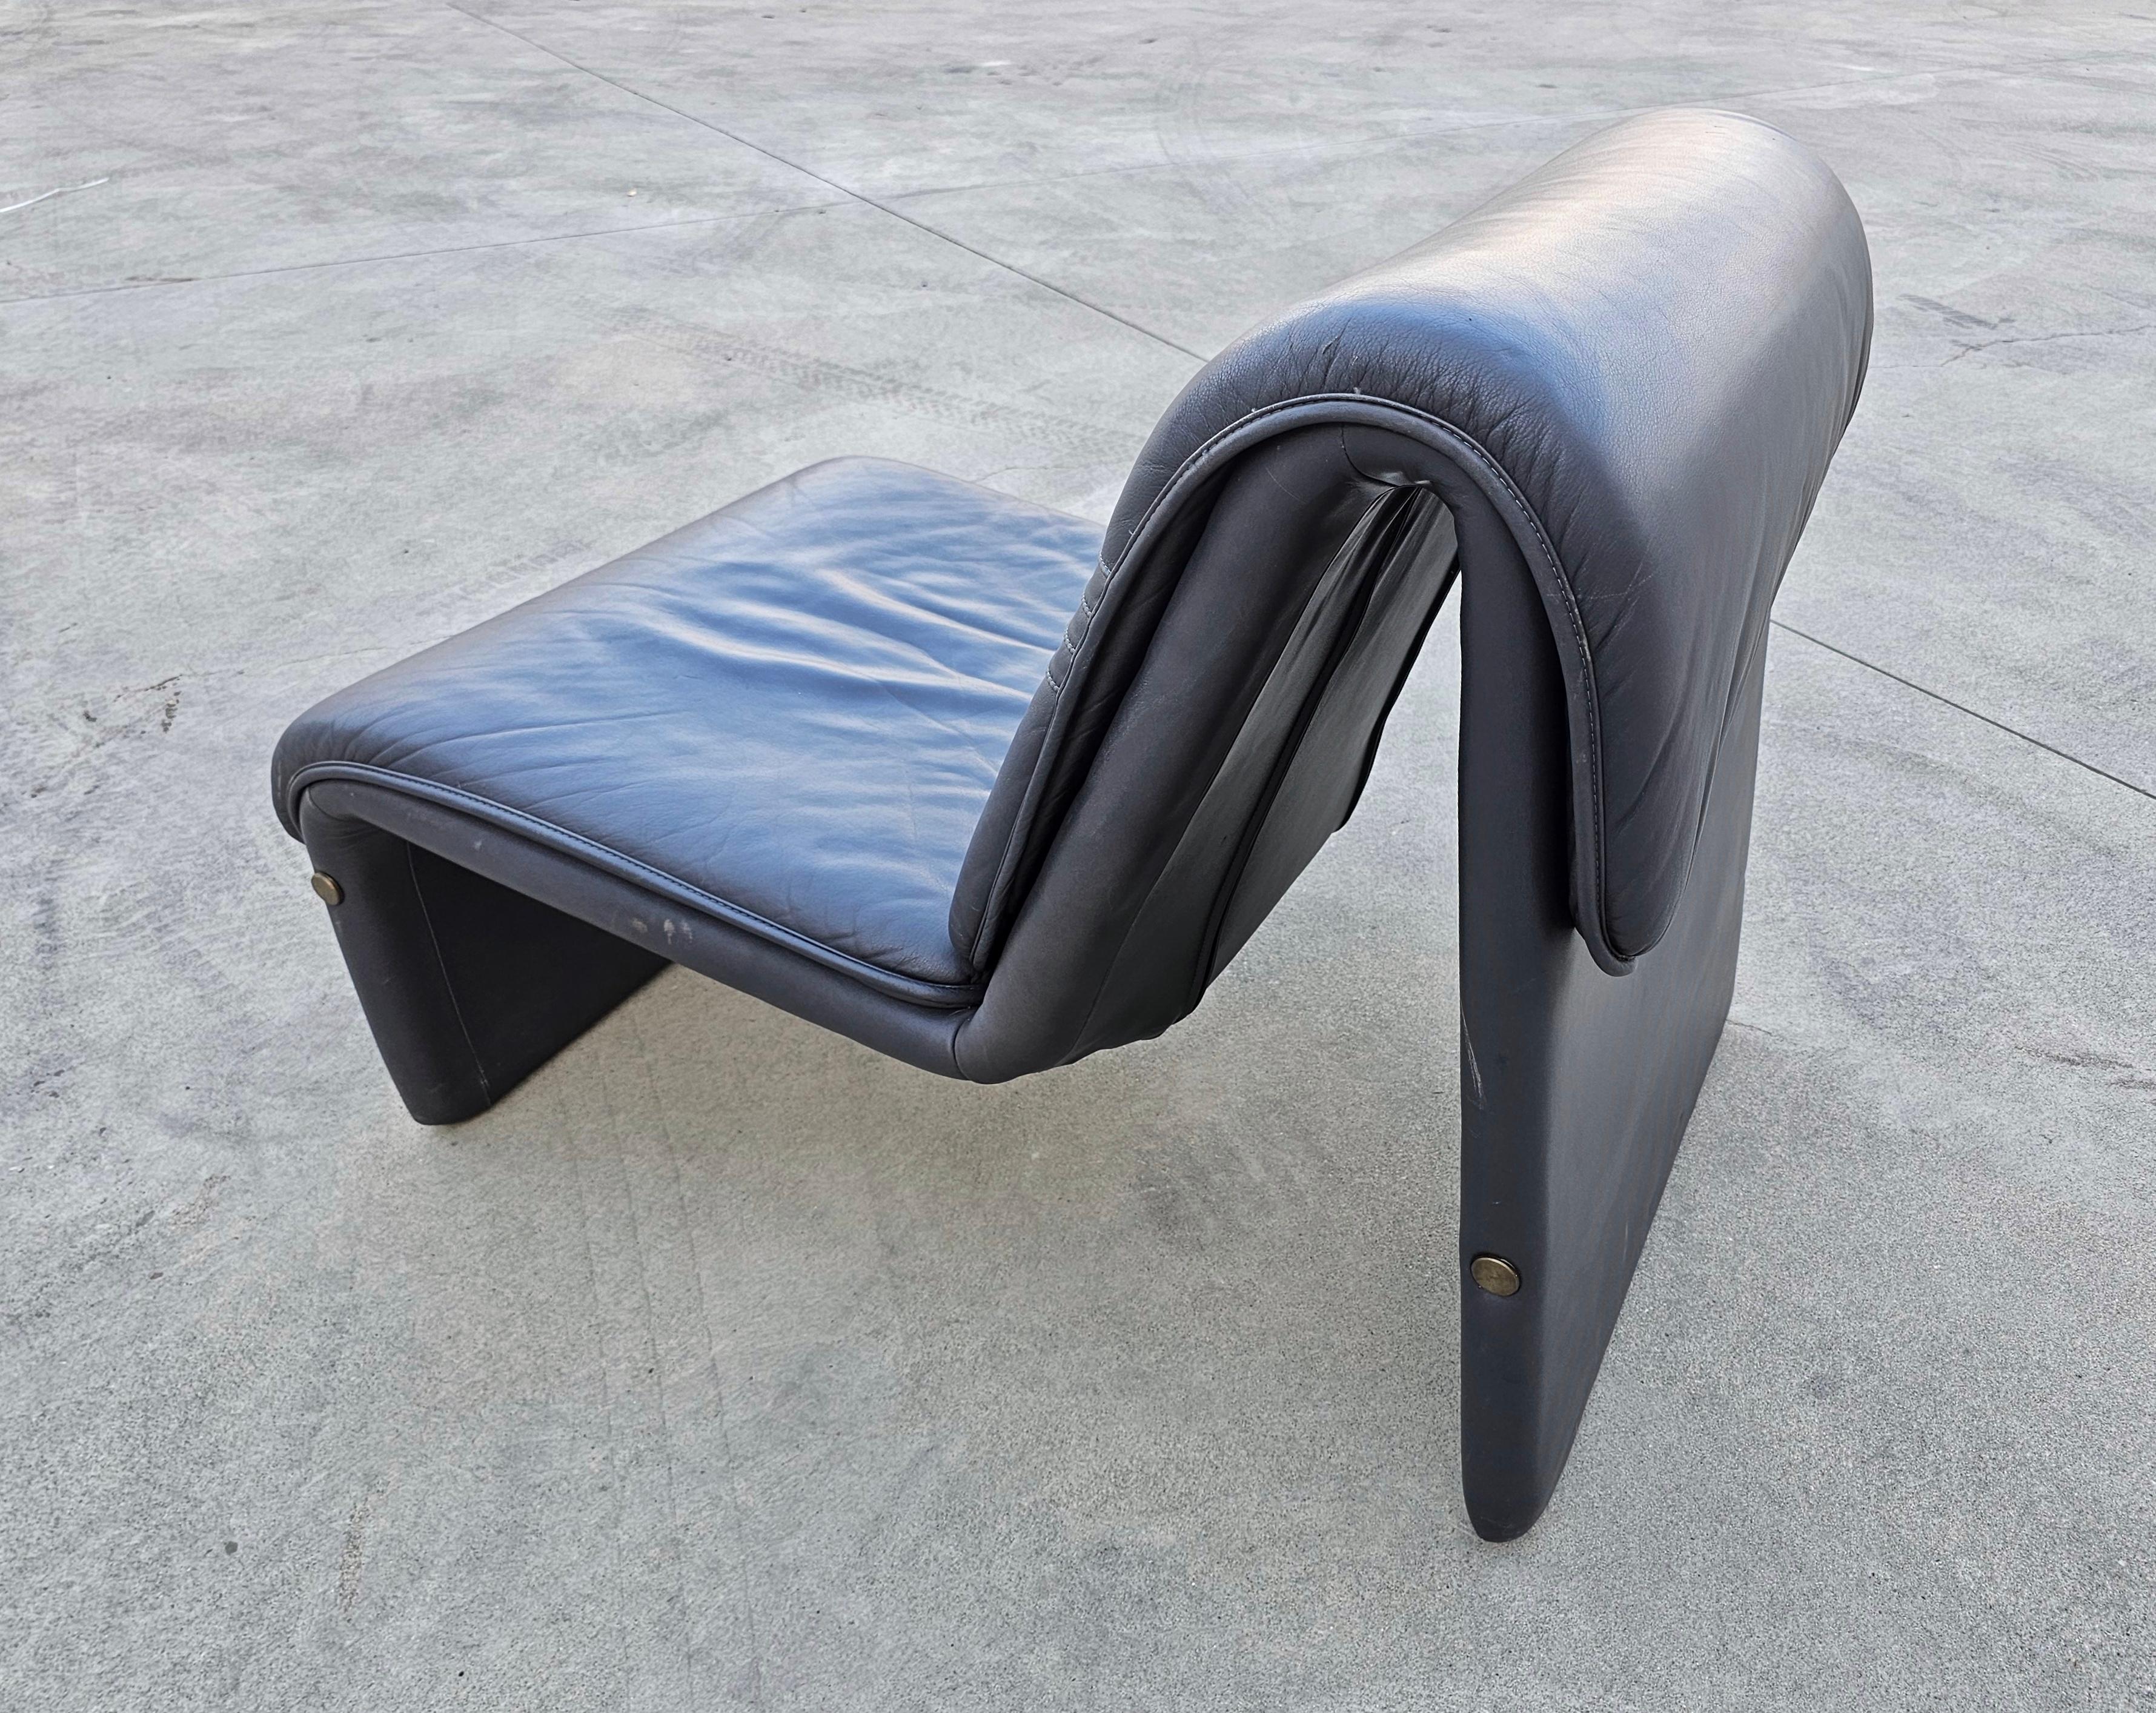 Late 20th Century Postmodern Leather Lounge Chairs in style of Etienne Fermigier, Switzerland 1978 For Sale